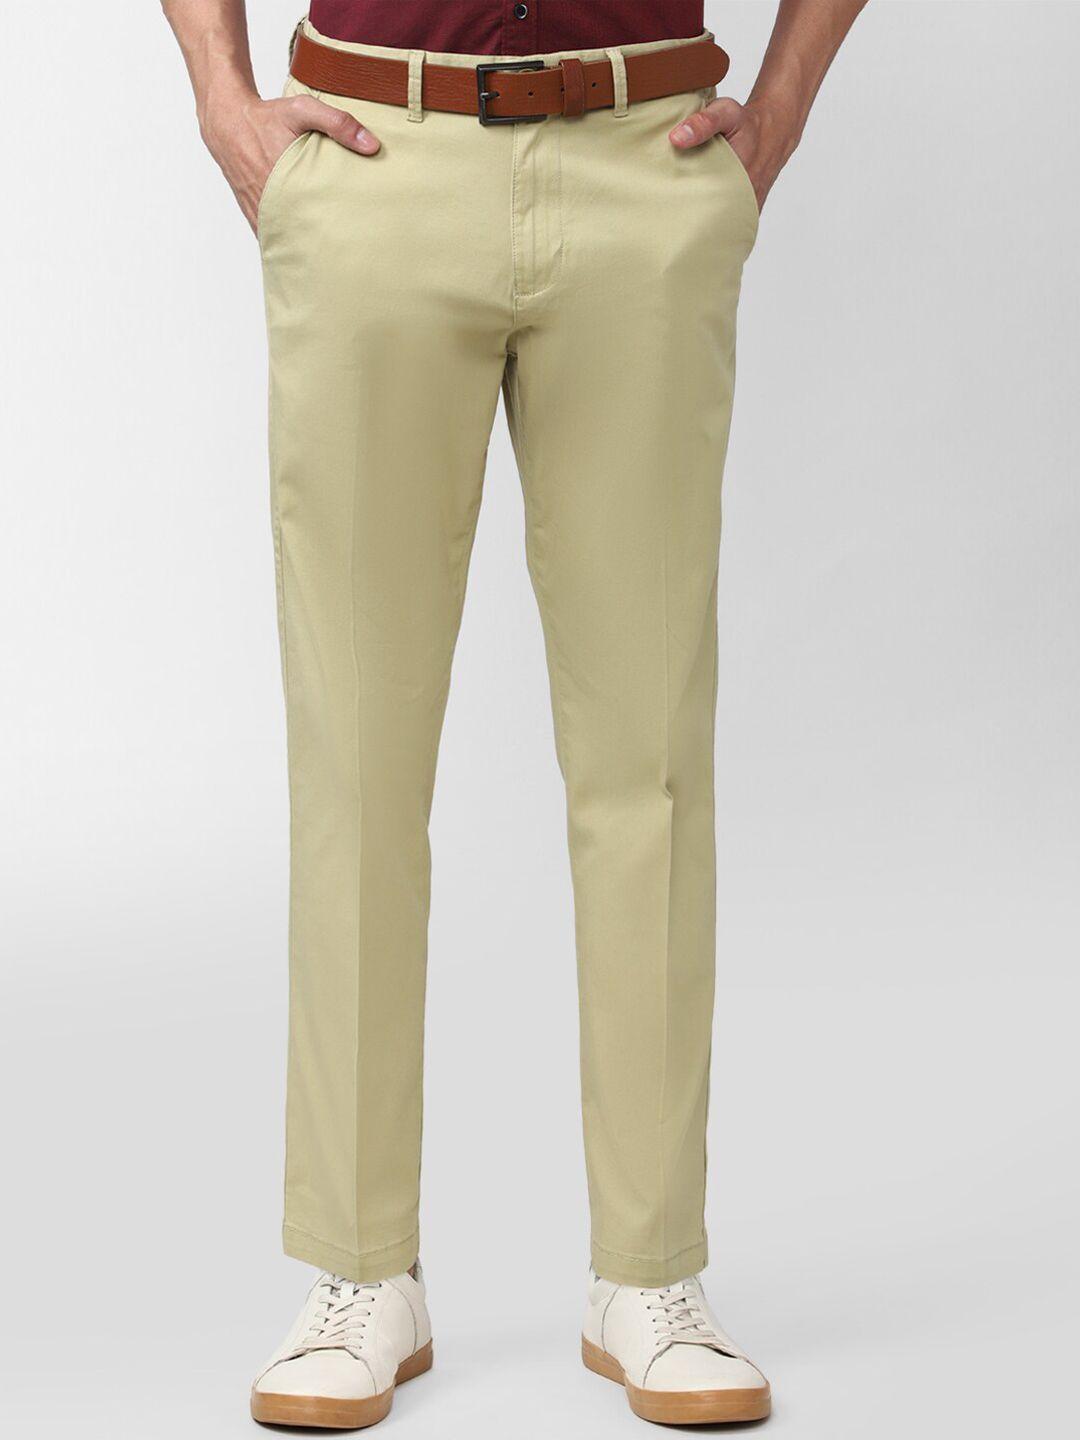 peter-england-casuals-men-yellow-slim-fit-chinos-trousers